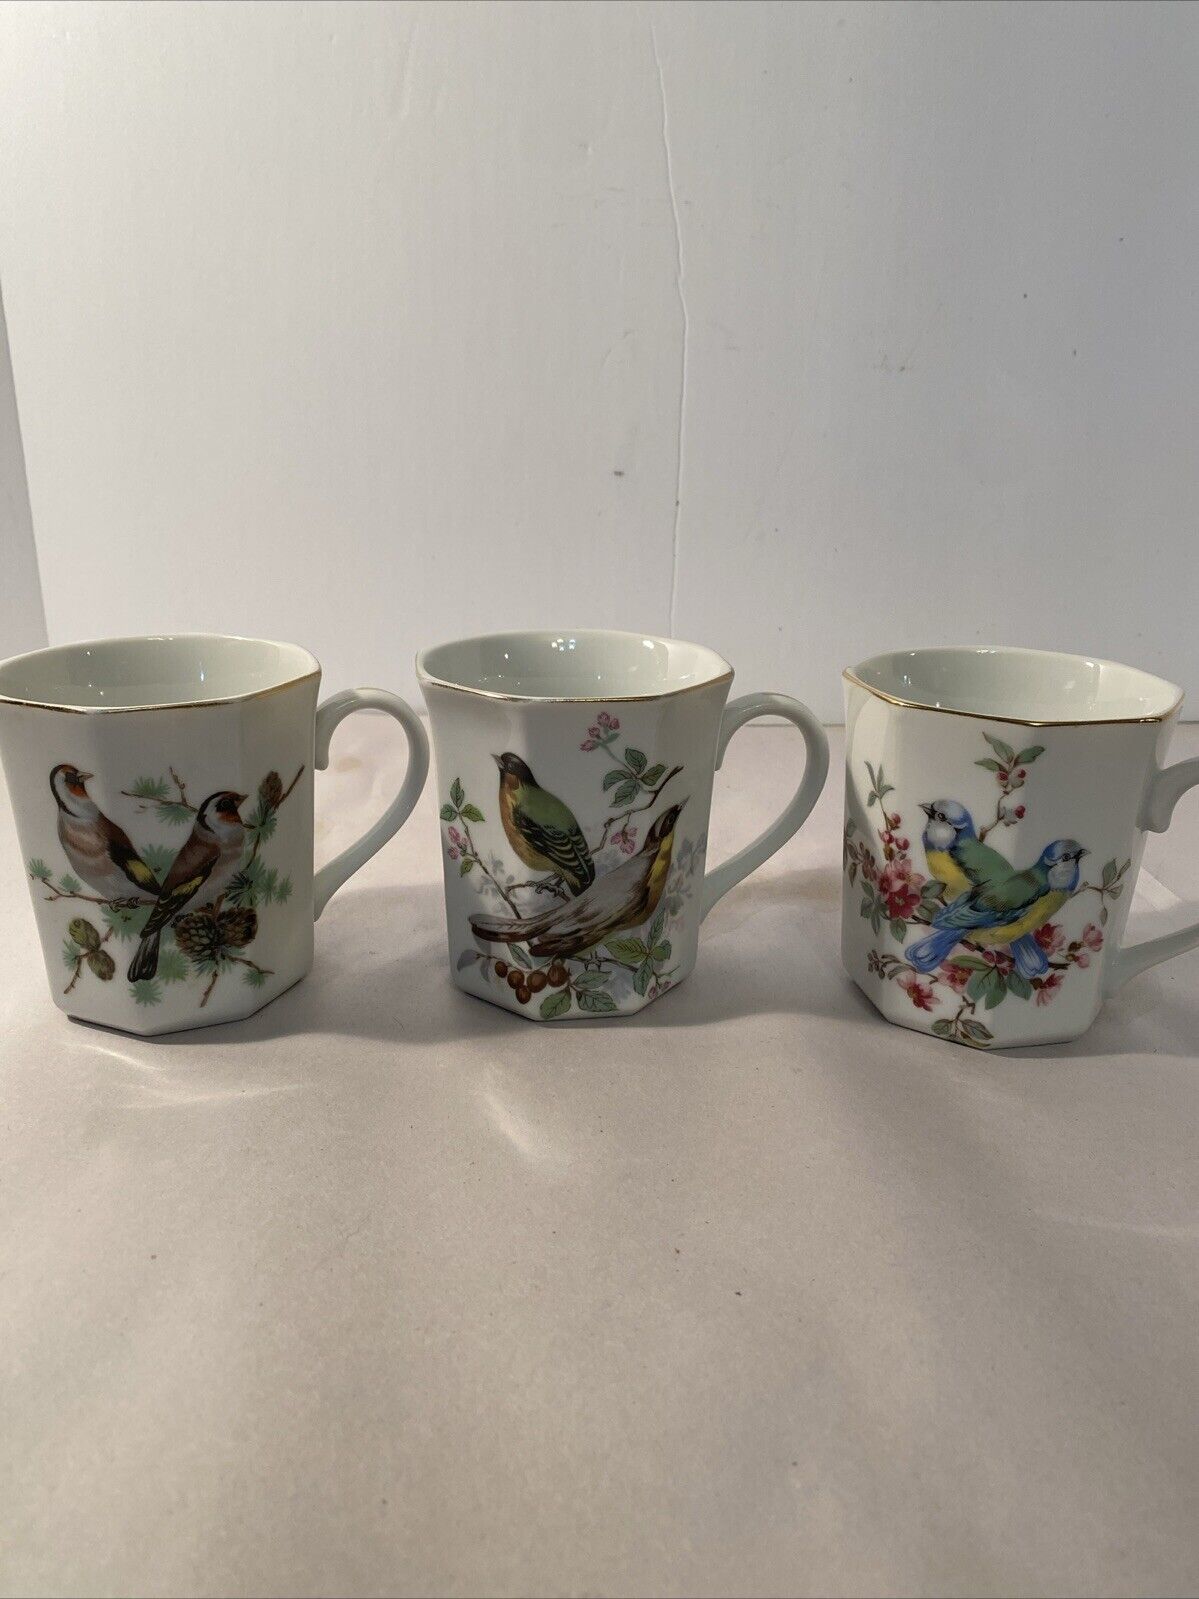 3 Porcelain birds with floral tea /coffee Cups